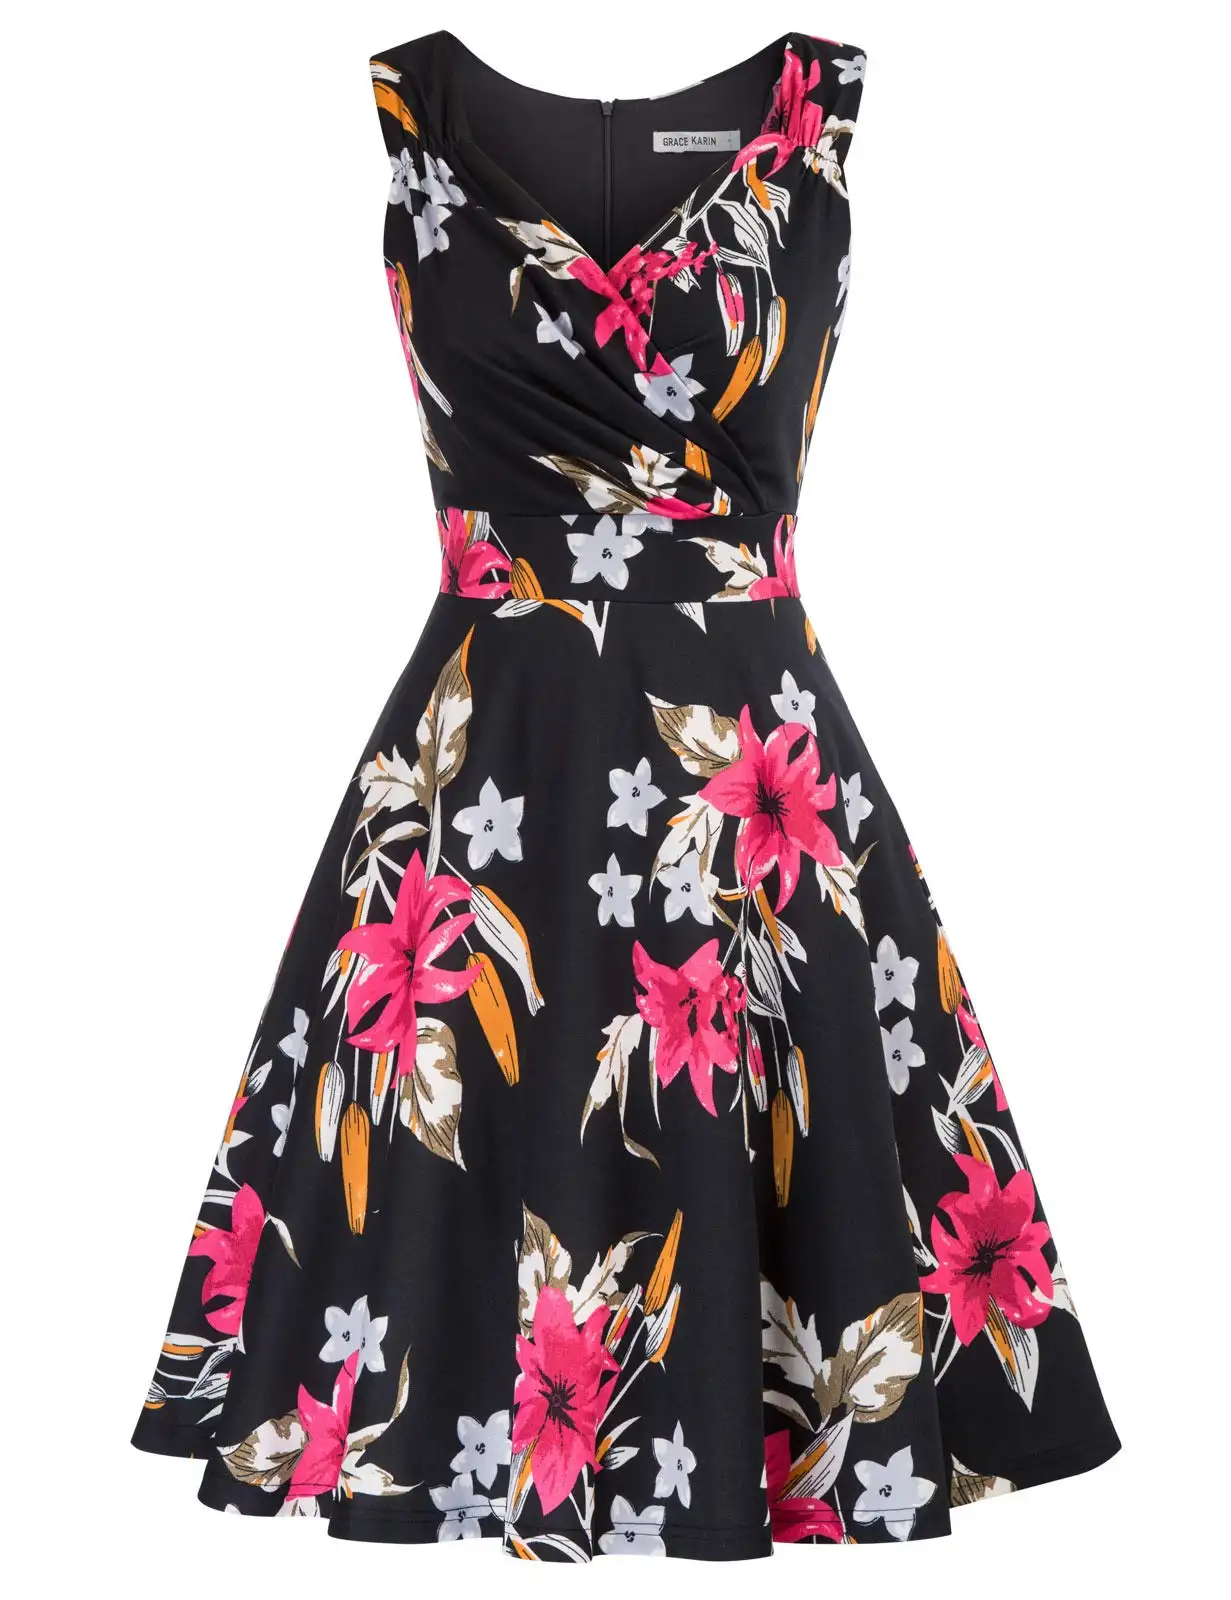 New Arrival Floral Print Sleeveless Summer Beach Fashion Casual Women Mini Dress For Vacation